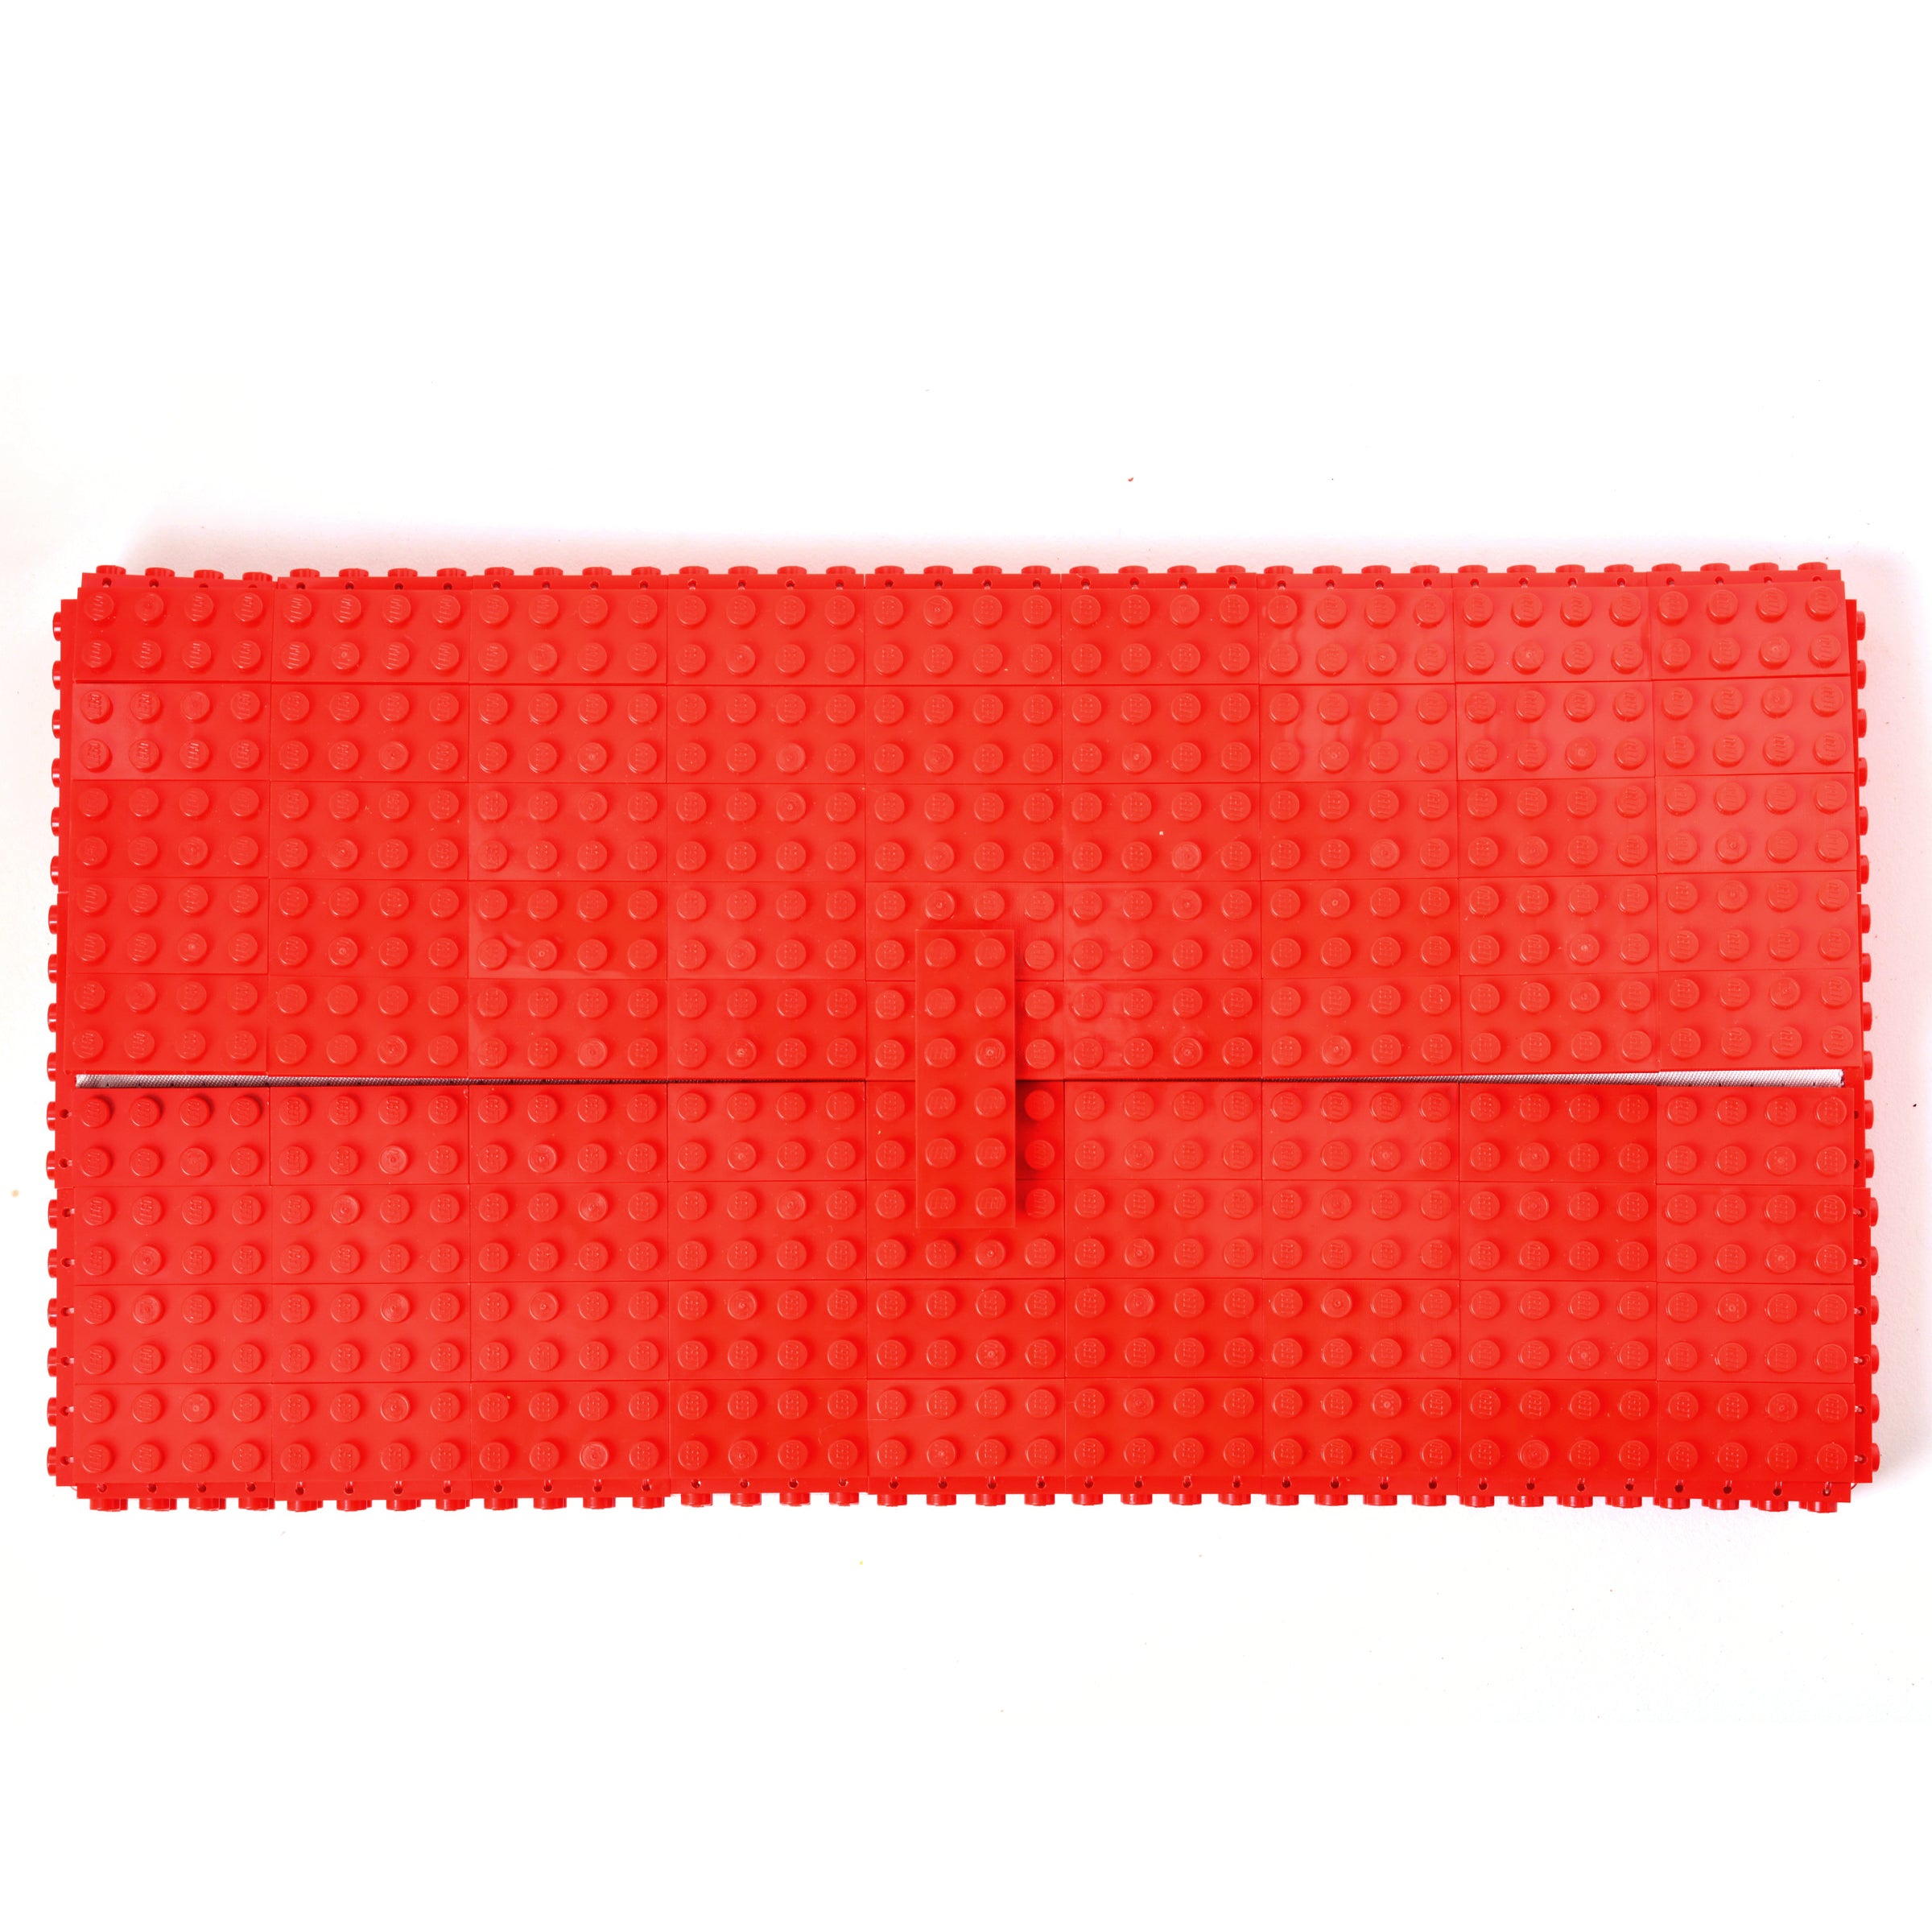 Red oversize clutch